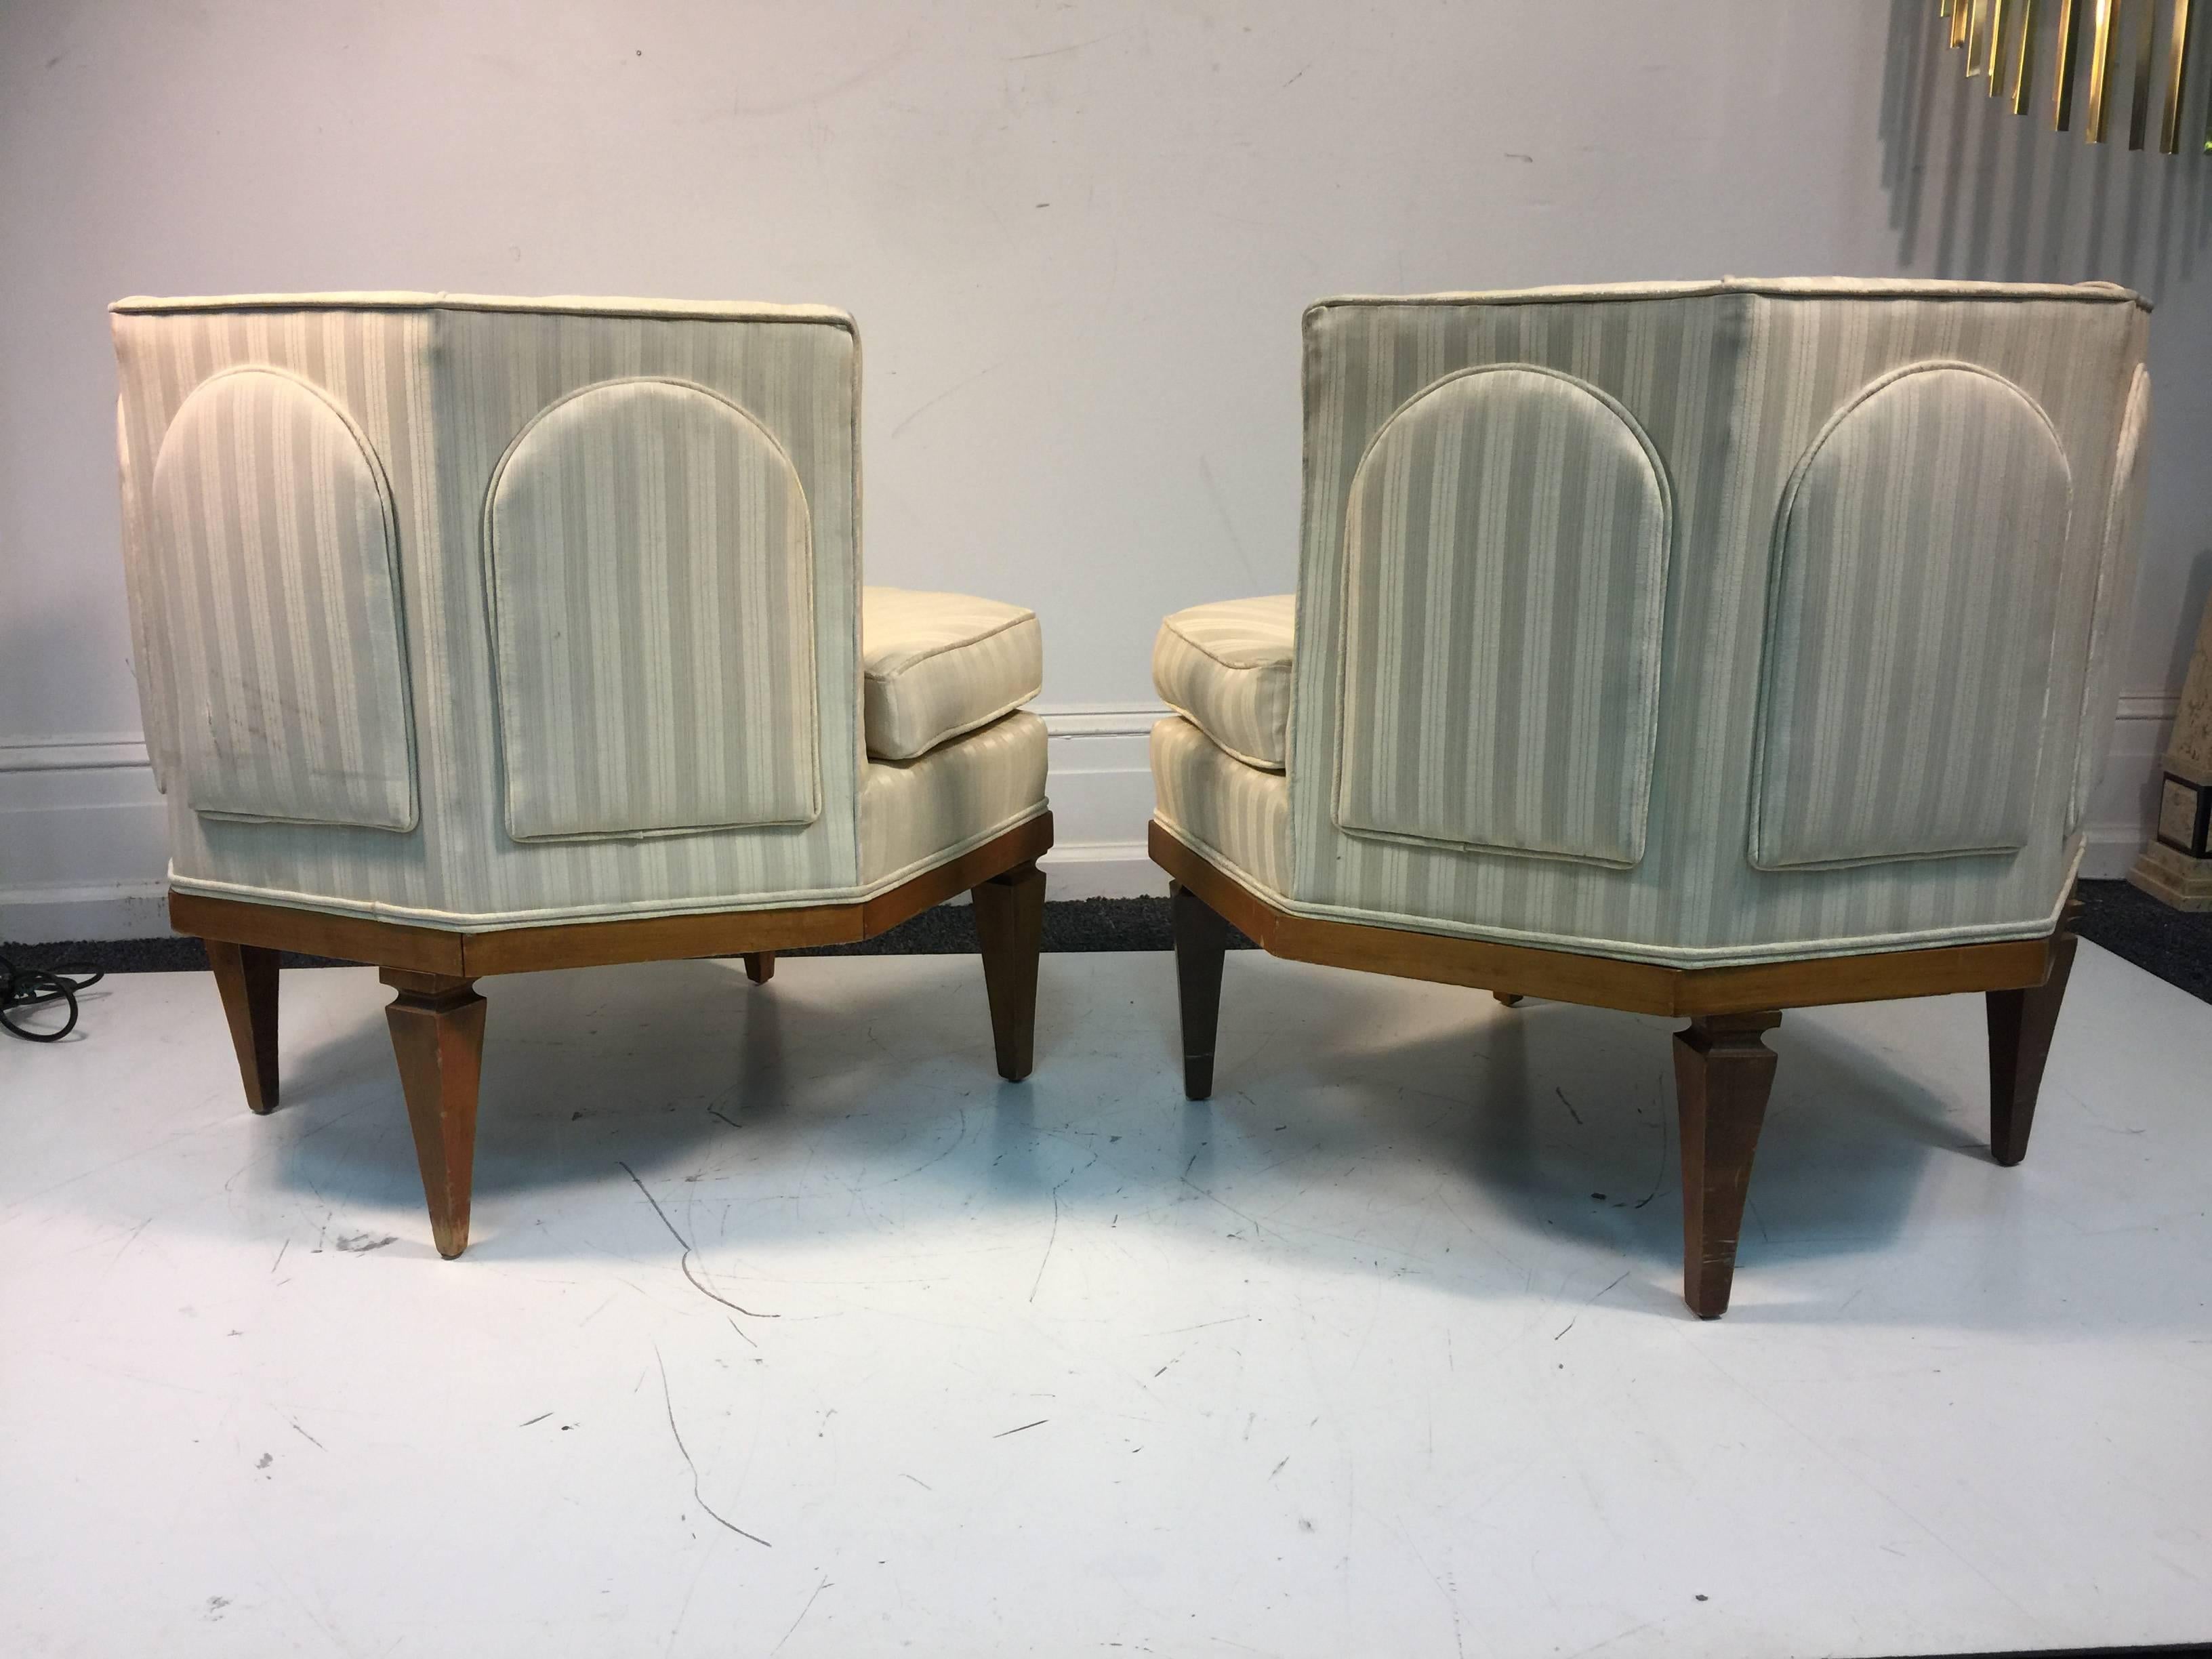 Rare Pair of Regency Style Club or Slipper Chairs in the Manner of Parzinger In Good Condition For Sale In Mount Penn, PA